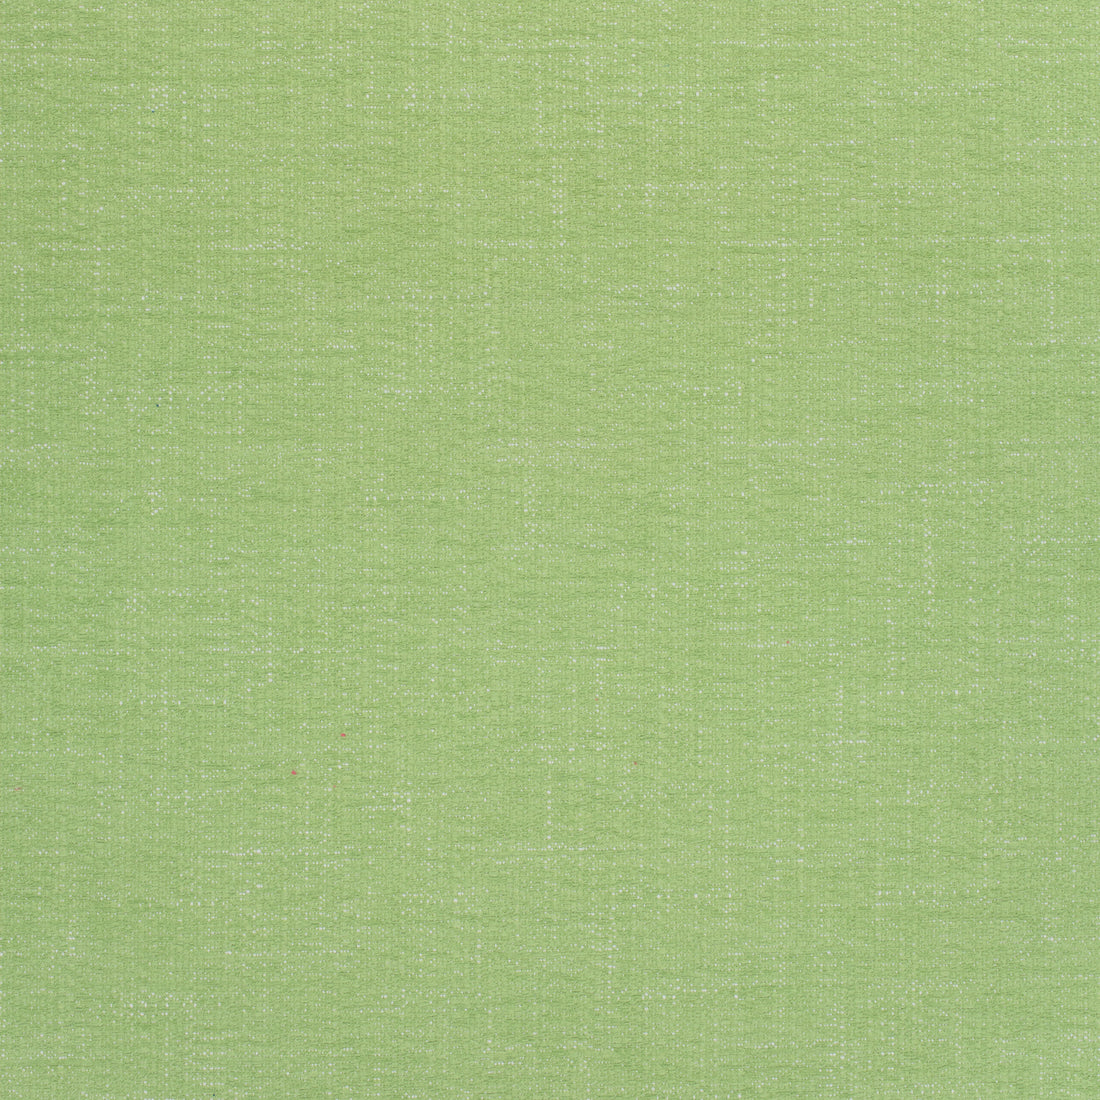 Vista fabric in green apple color - pattern number W73385 - by Thibaut in the Landmark Textures collection